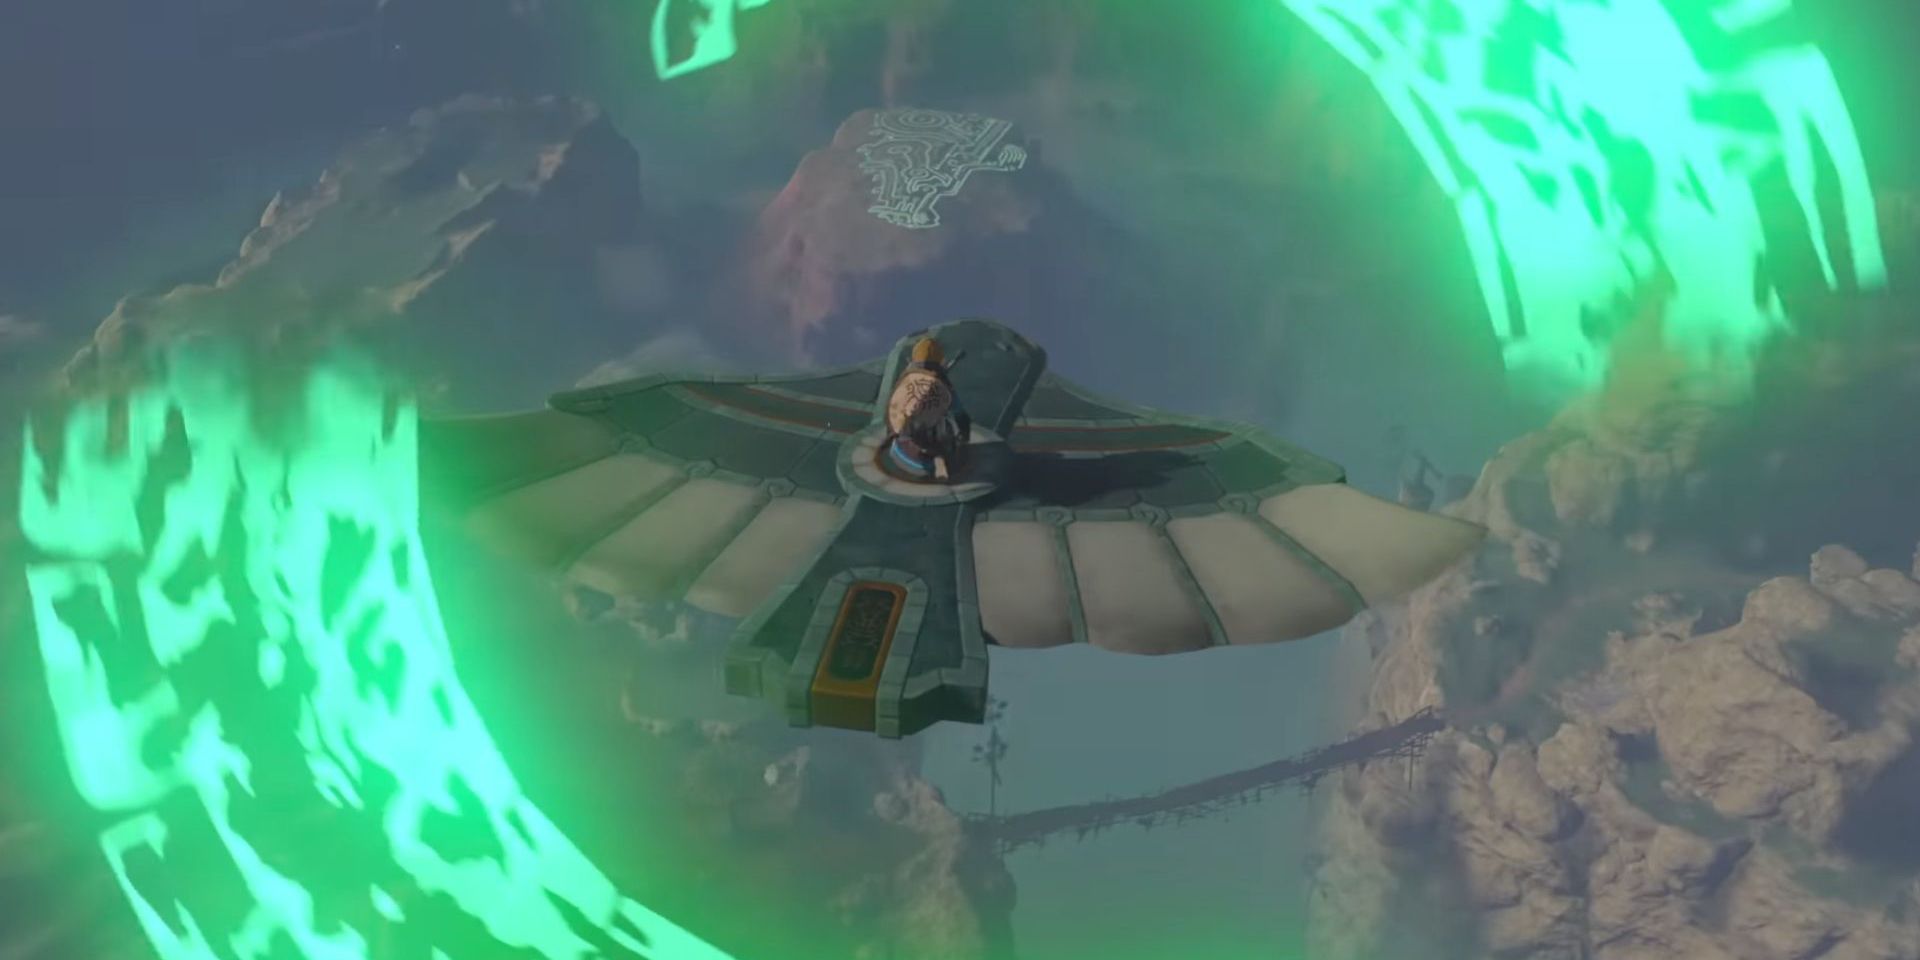 A still from the Tears of the Kingdom trailer shows Link riding a bird-like vehicle surrounded by a green vortex